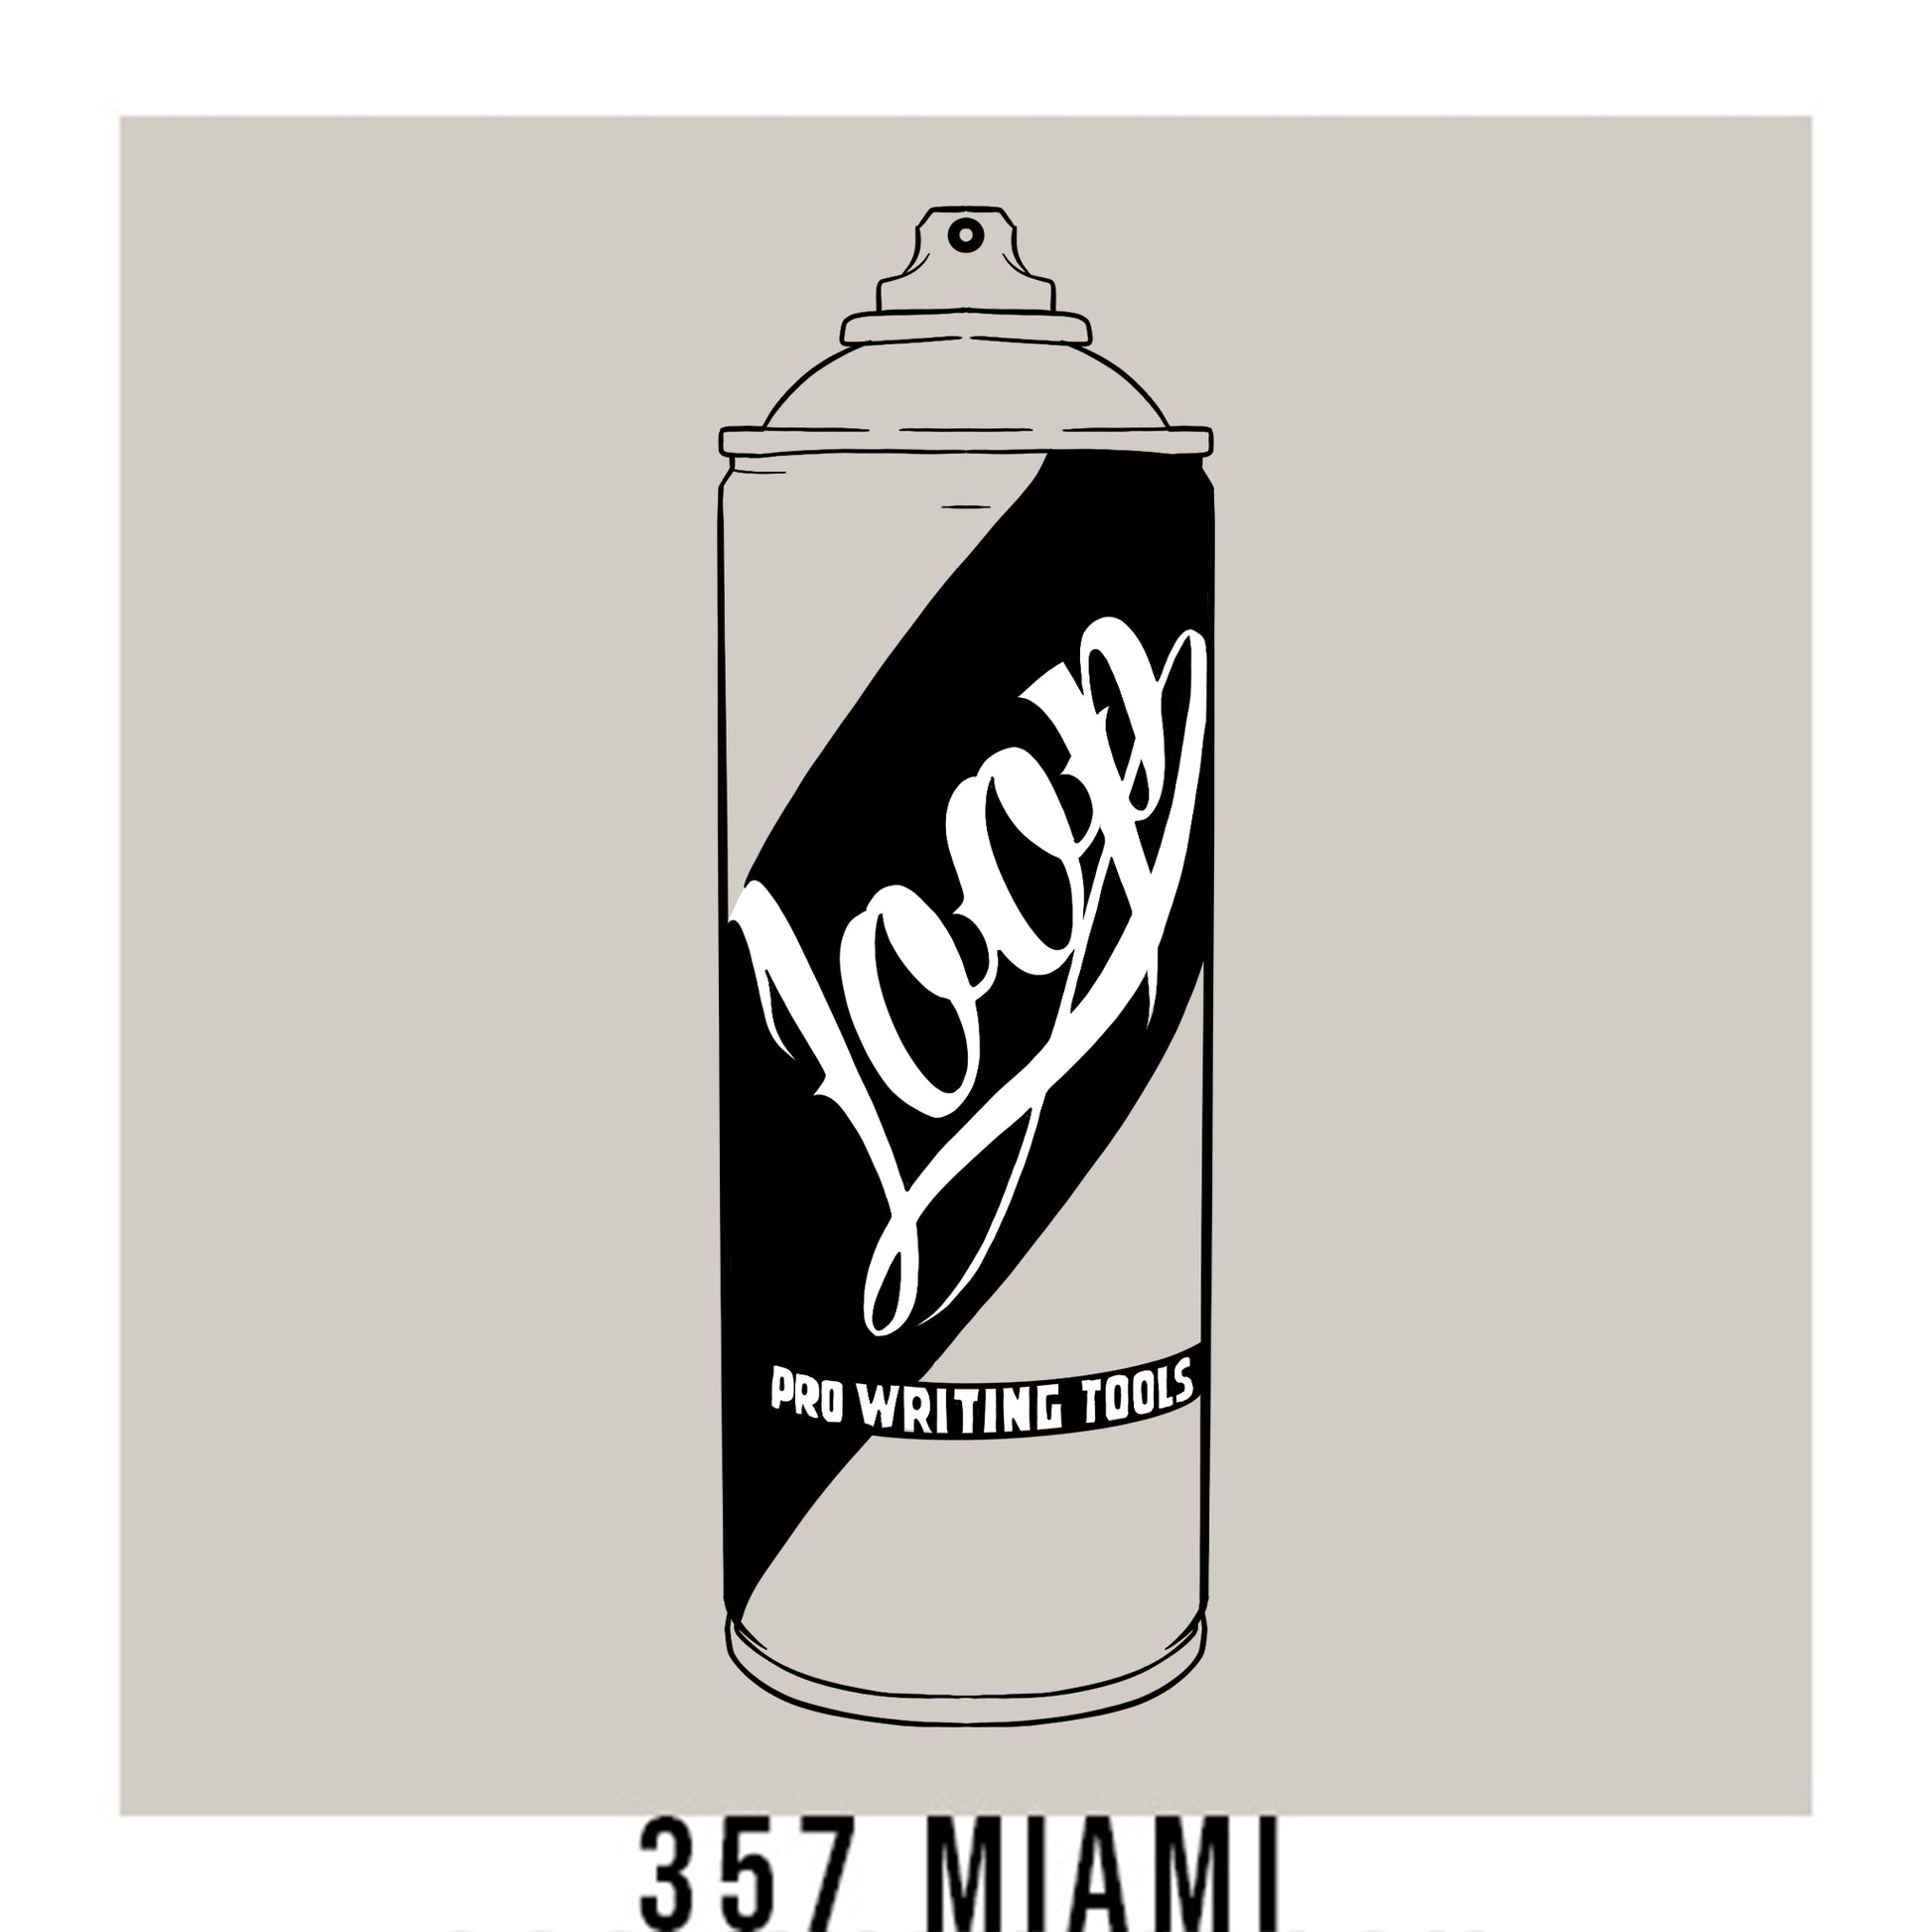 A black outline drawing of a light grey spray paint can with the word "Loop" written on the face in script. The background is a color swatch of the same light grey with a white border with the words "357 Miami" at the bottom.